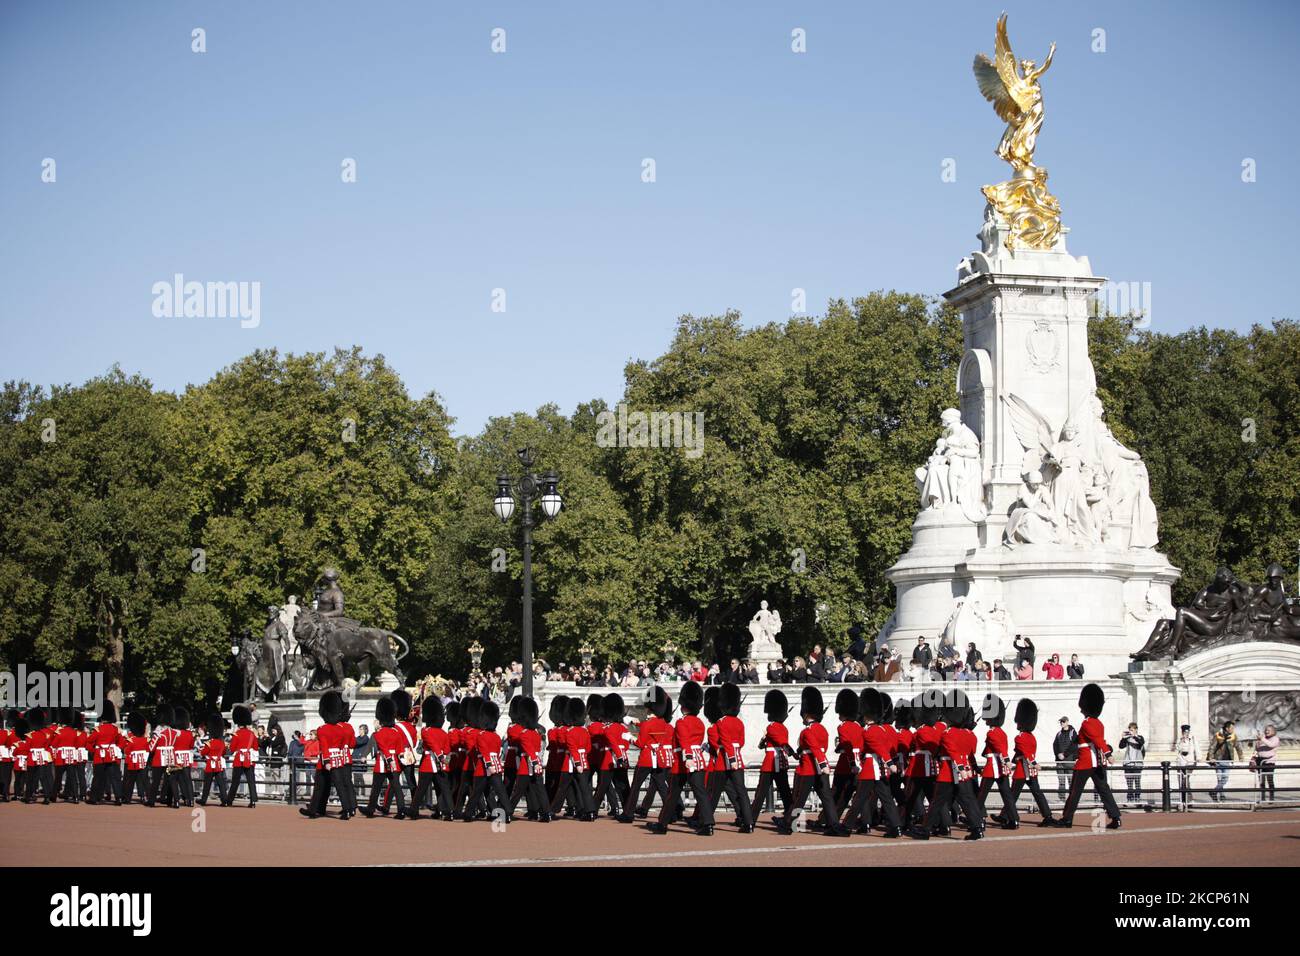 Members of the Coldstream Guards regiment of the British Army Household Division march from Wellington Barracks past the Victoria Memorial on their way into Buckingham Palace to replace members of the Royal Regiment of Canadian Artillery as the Canadian soldiers take part in their first Changing of the Guard 'dismount' from duty in London, England, on October 6, 2021. Ninety Canadian personnel are carrying out Queen's Guard duties at the four residences of the Royal Family in London (Buckingham Palace, St James's Palace, Windsor Castle and the Tower of London) from October 4-22. For the mount  Stock Photo